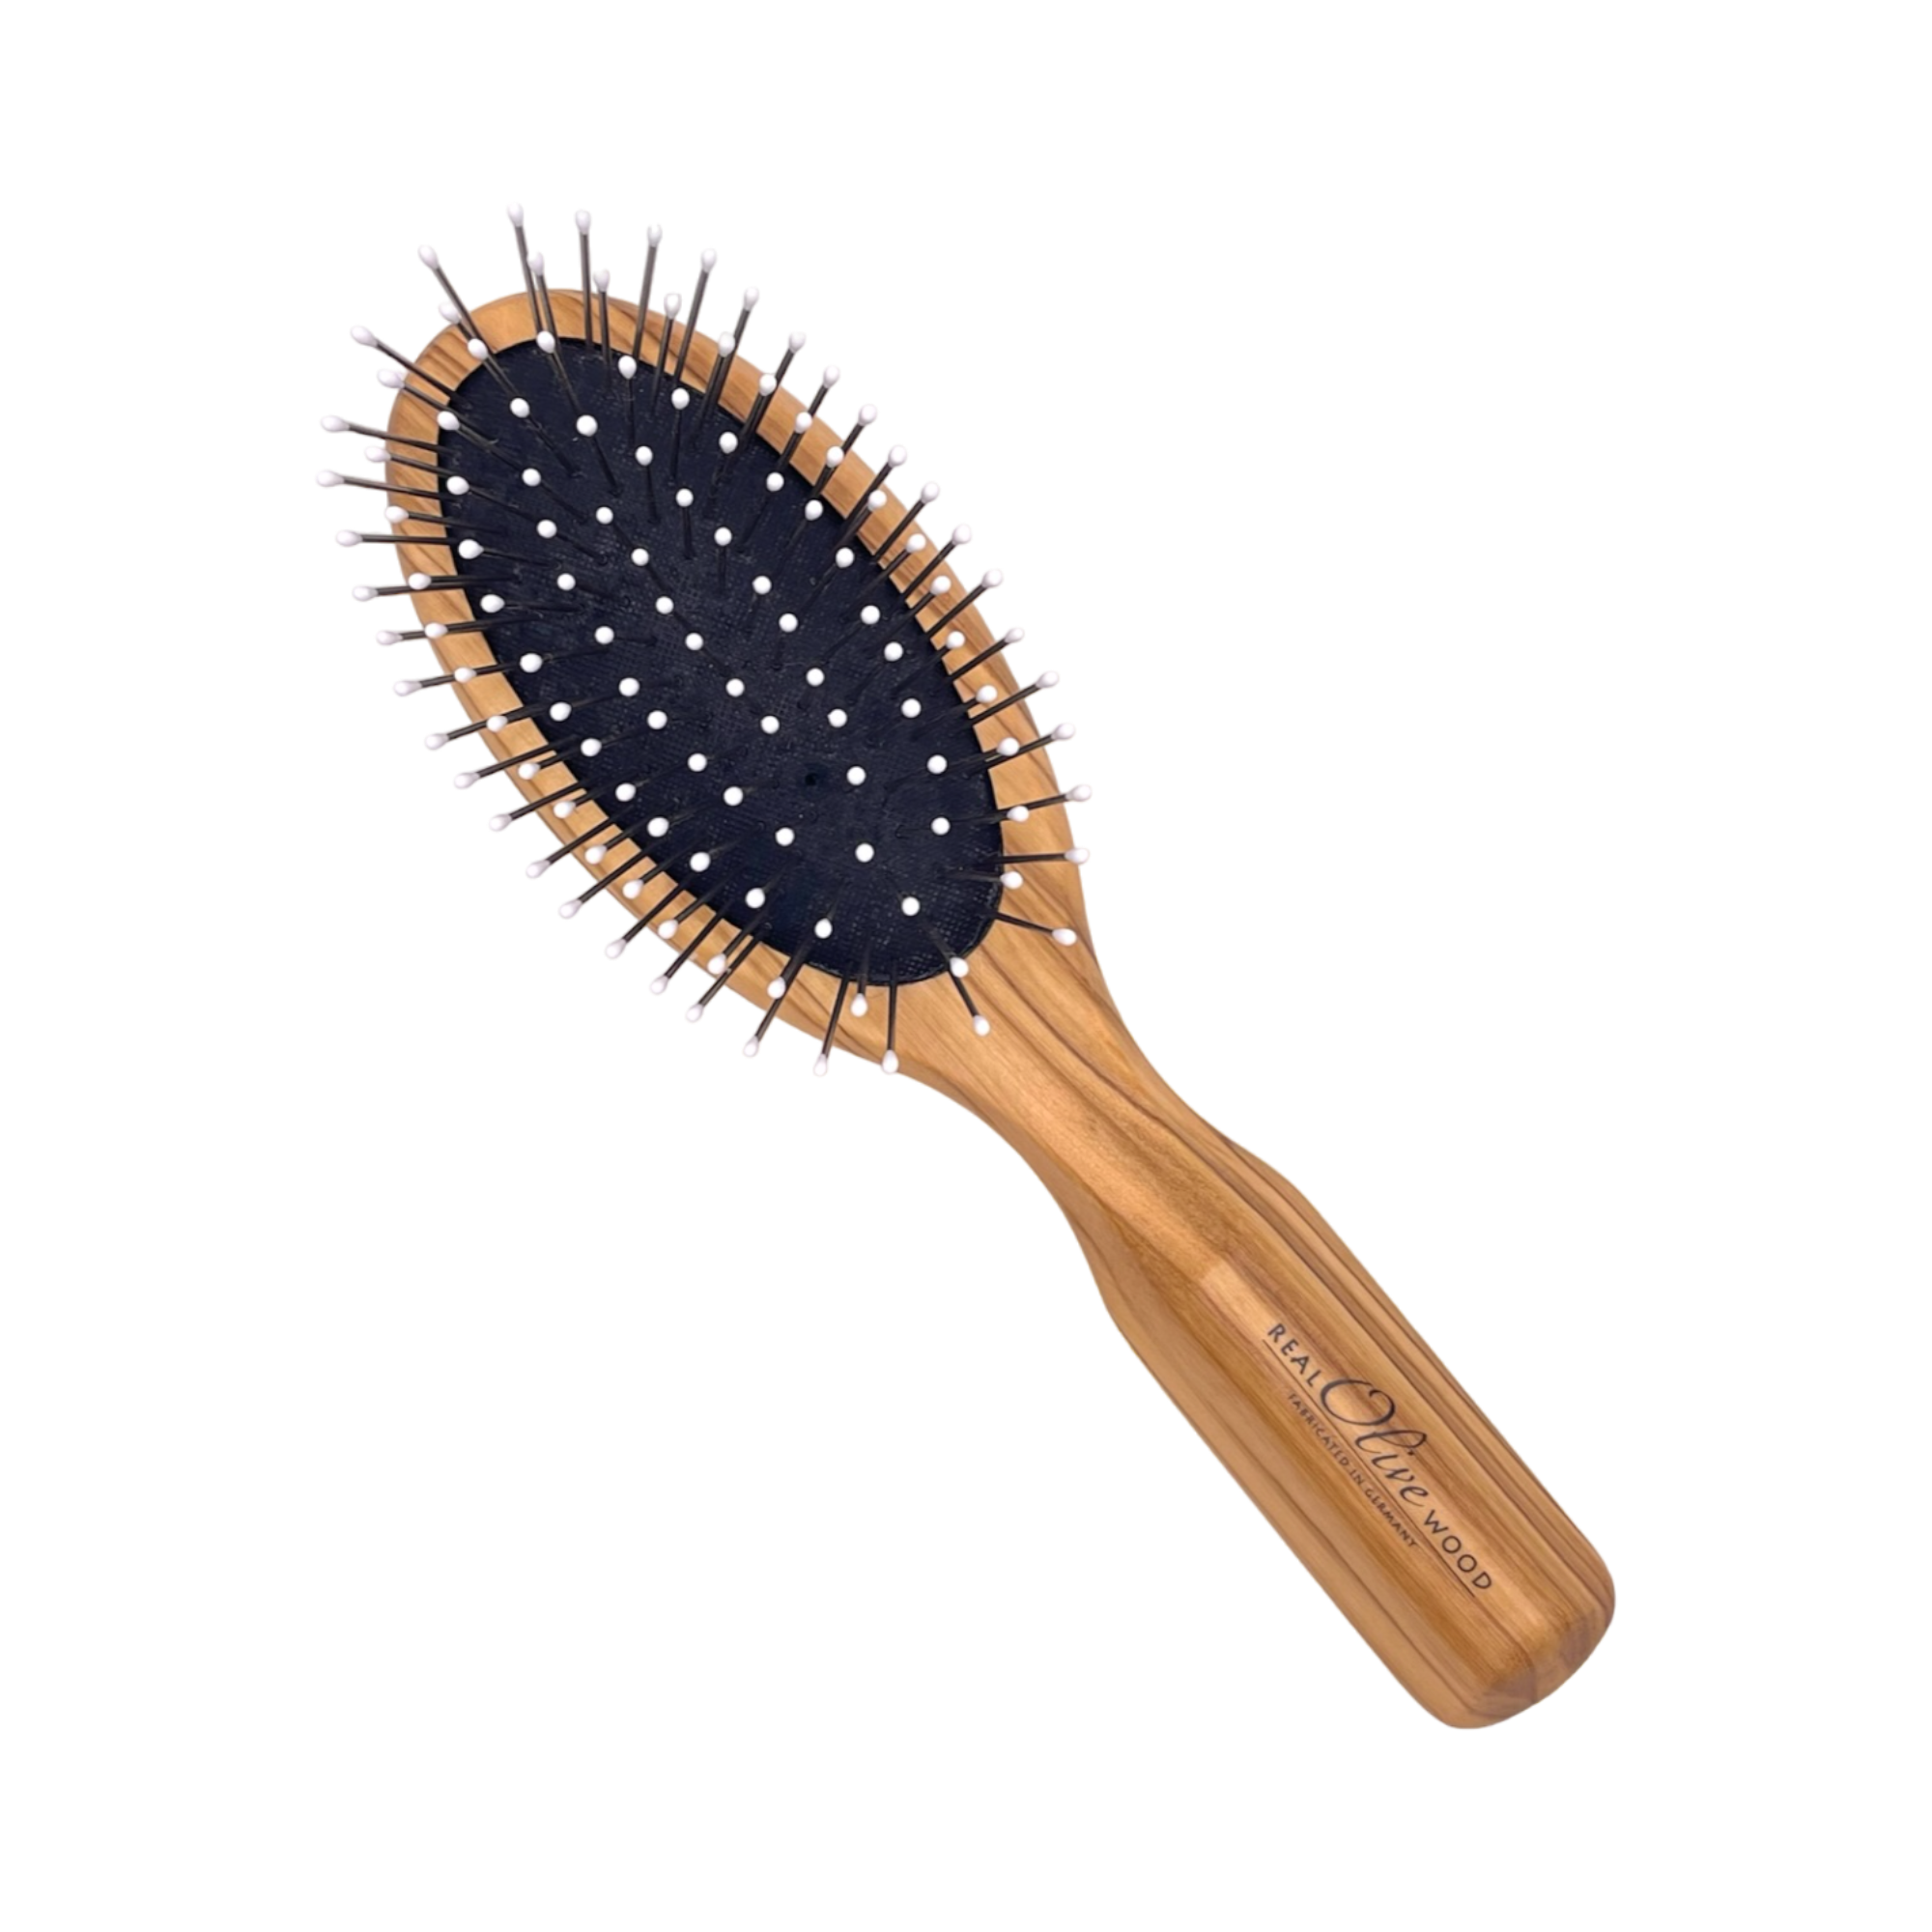 Dural Olive wood hair brush with rubber cushion, steel pins with ball tips